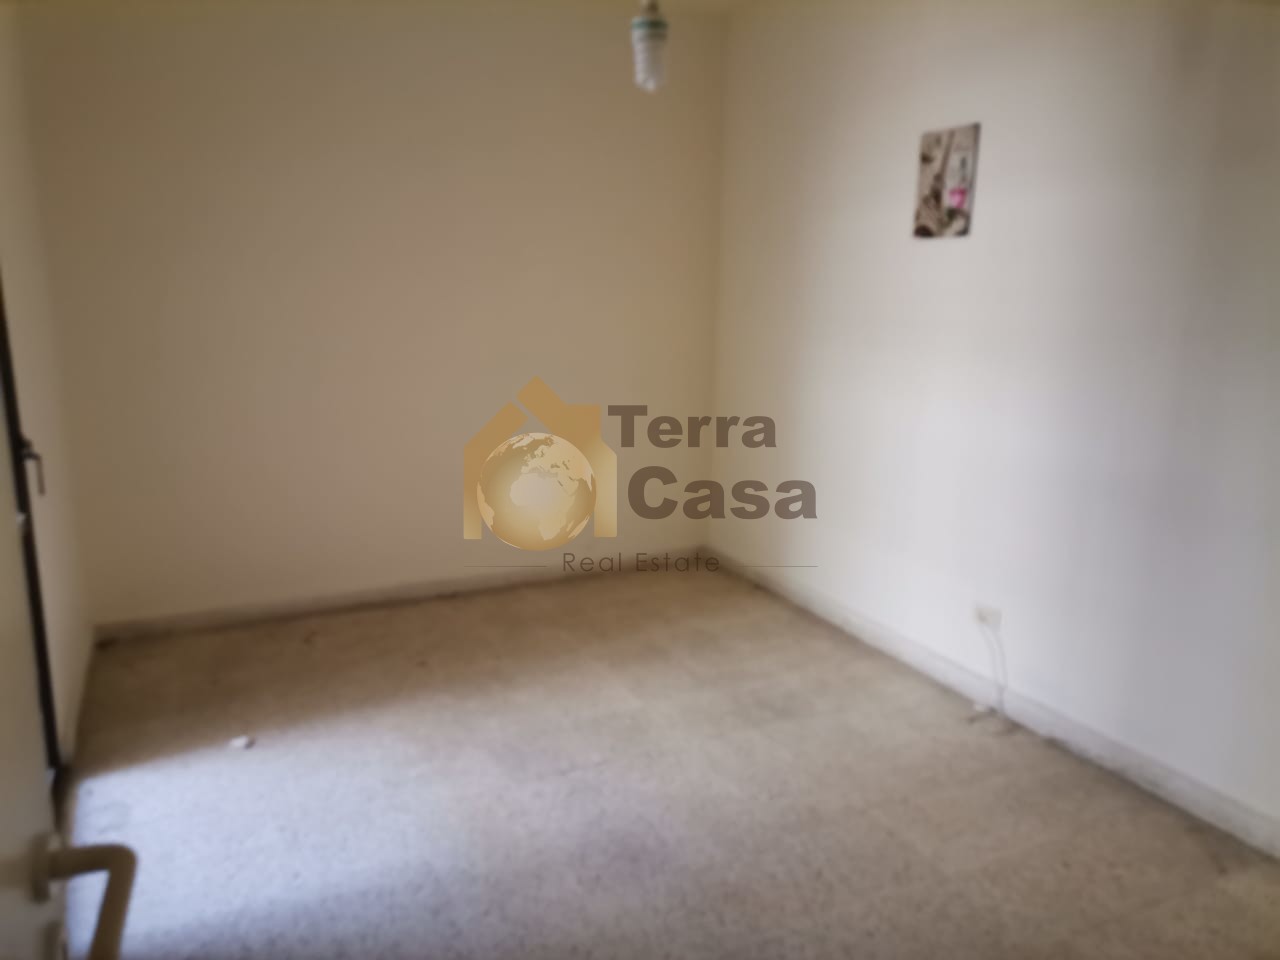 Brand new apartment nice location for rent .Ref#2744